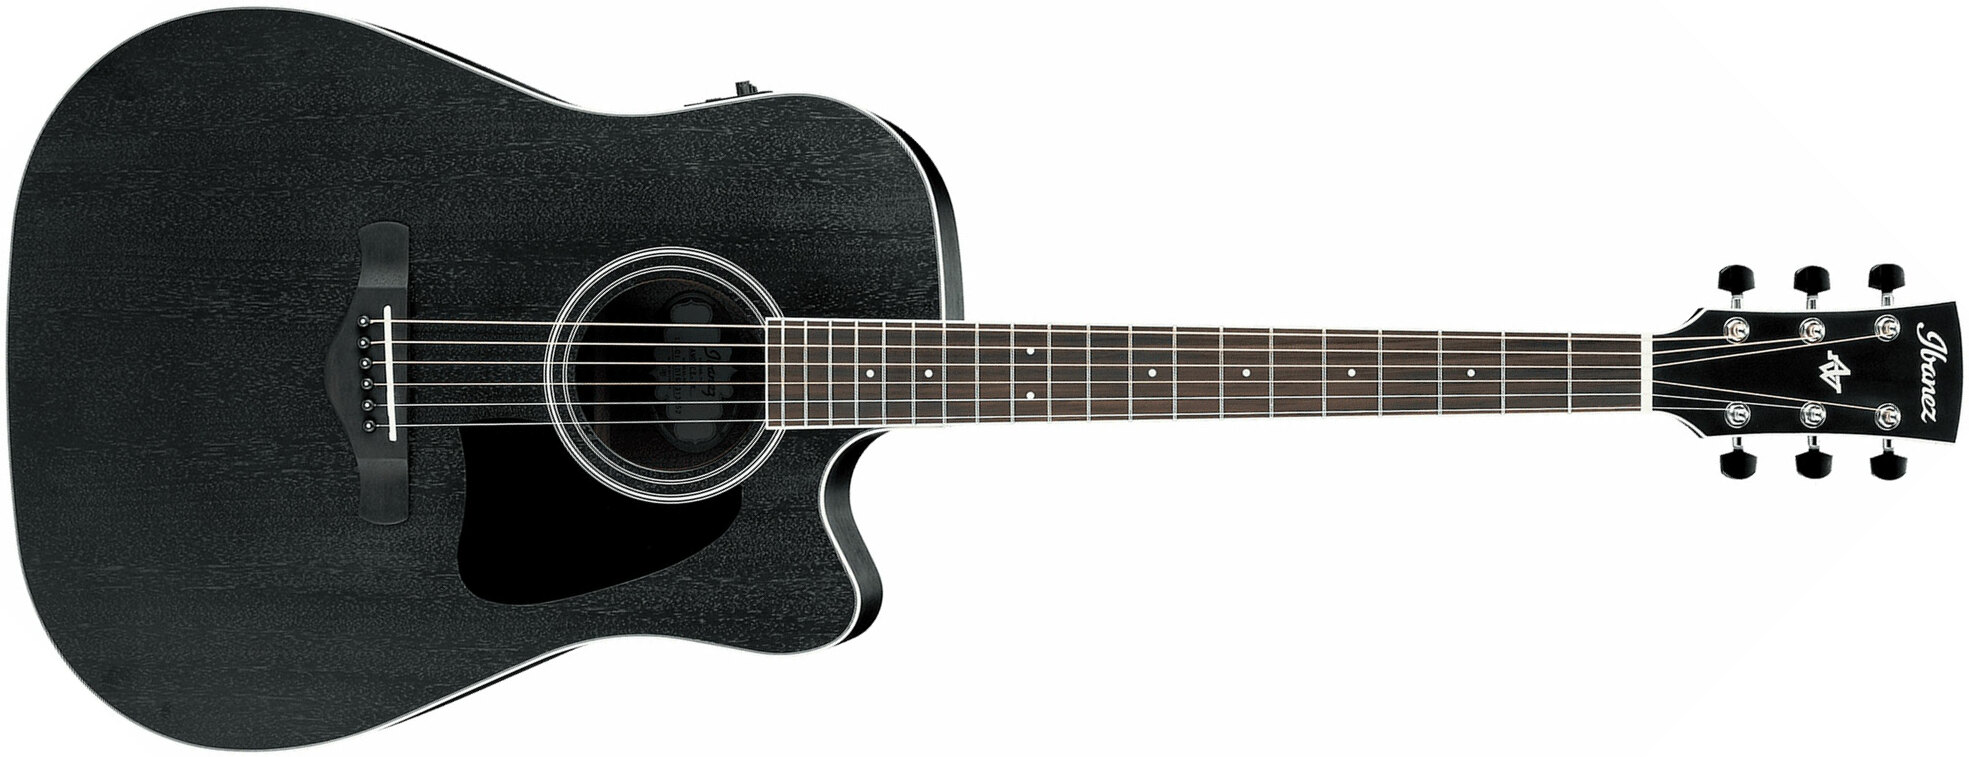 Ibanez Aw84ce Wk Artwood Dreadnought Cw Tout Okoume Ova - Weathered Black Open Pore - Electro acoustic guitar - Main picture